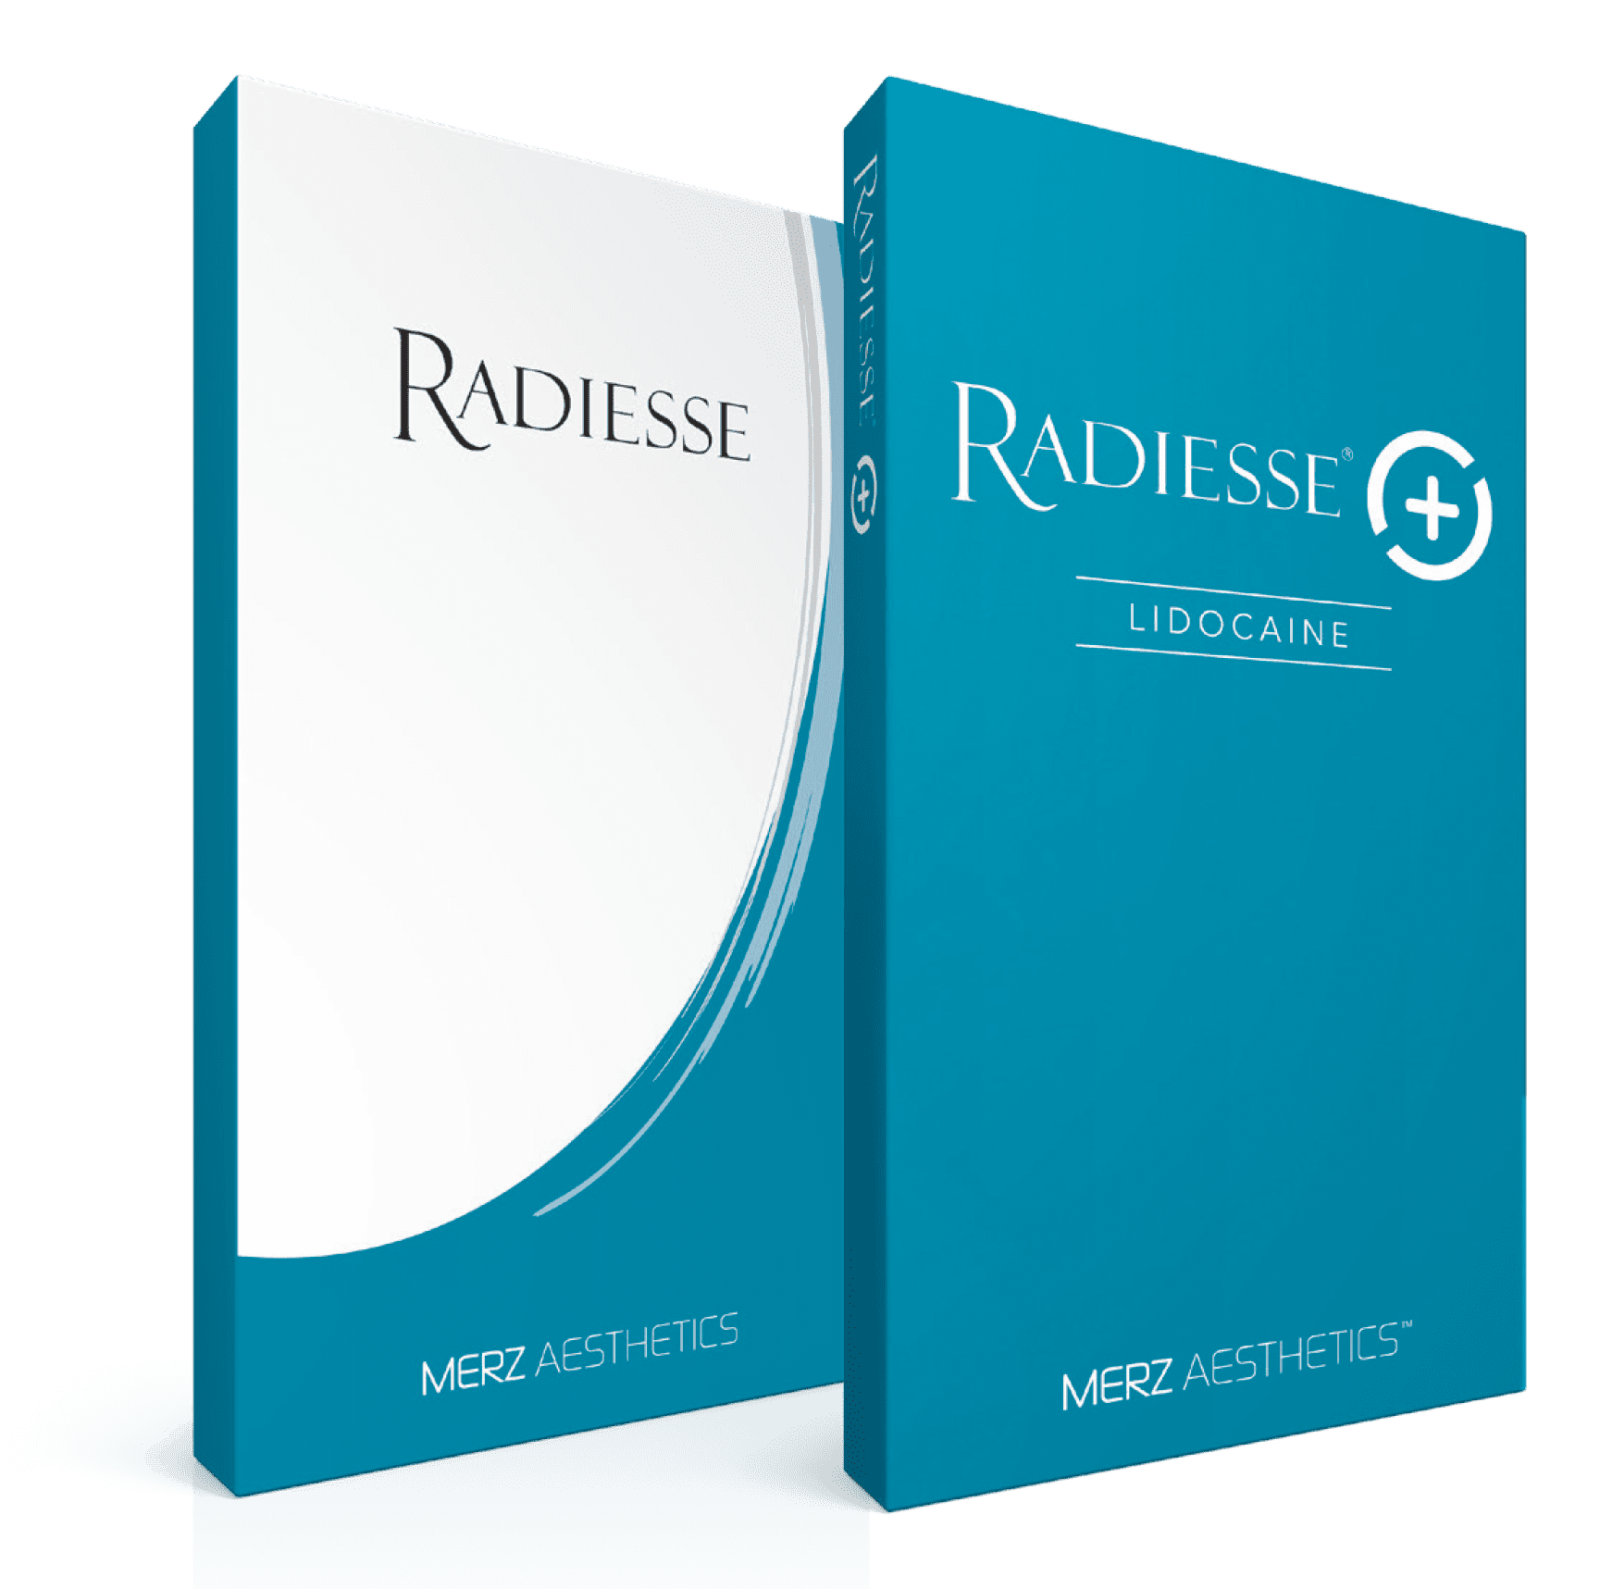 Radiesse product that are used for Dermal Fillers